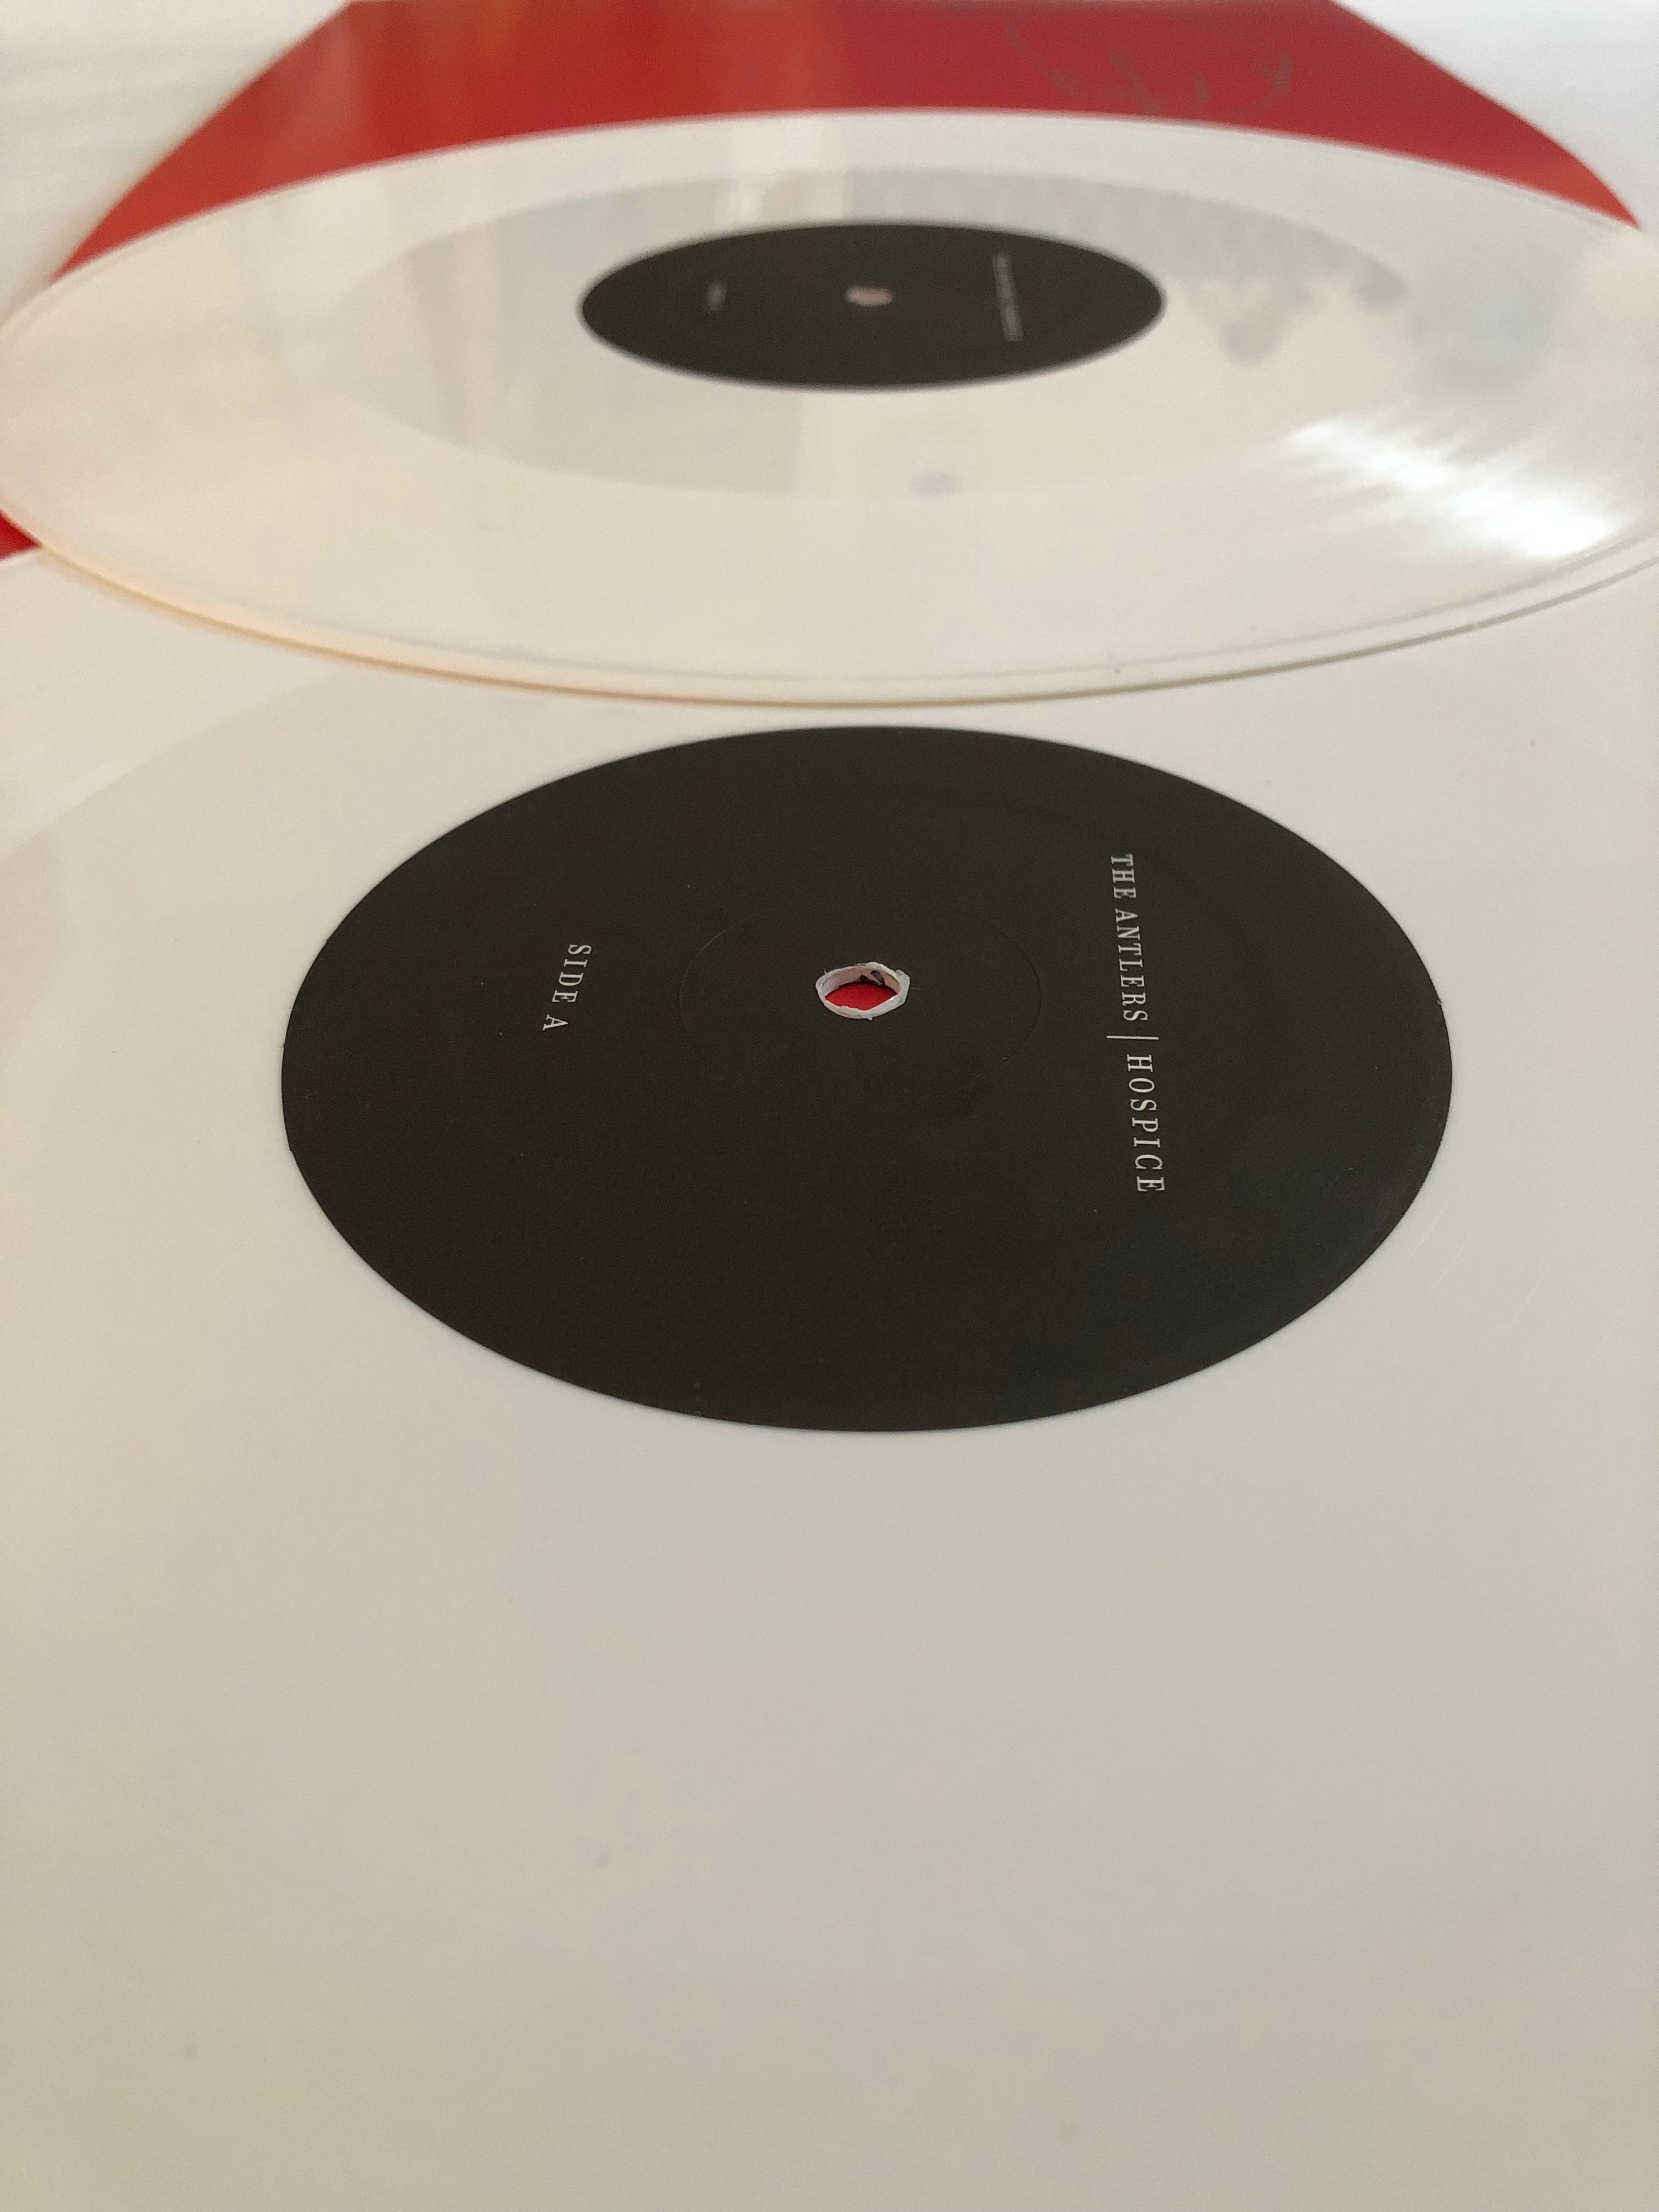 Alice efterskrift ukrudtsplante The Antlers on Twitter: "In '09, we were burning CD-Rs &amp; carefully  placing stickers on blank digipaks. 10 yrs later, Hospice gets a beautiful  vinyl reissue deserving of all the work that